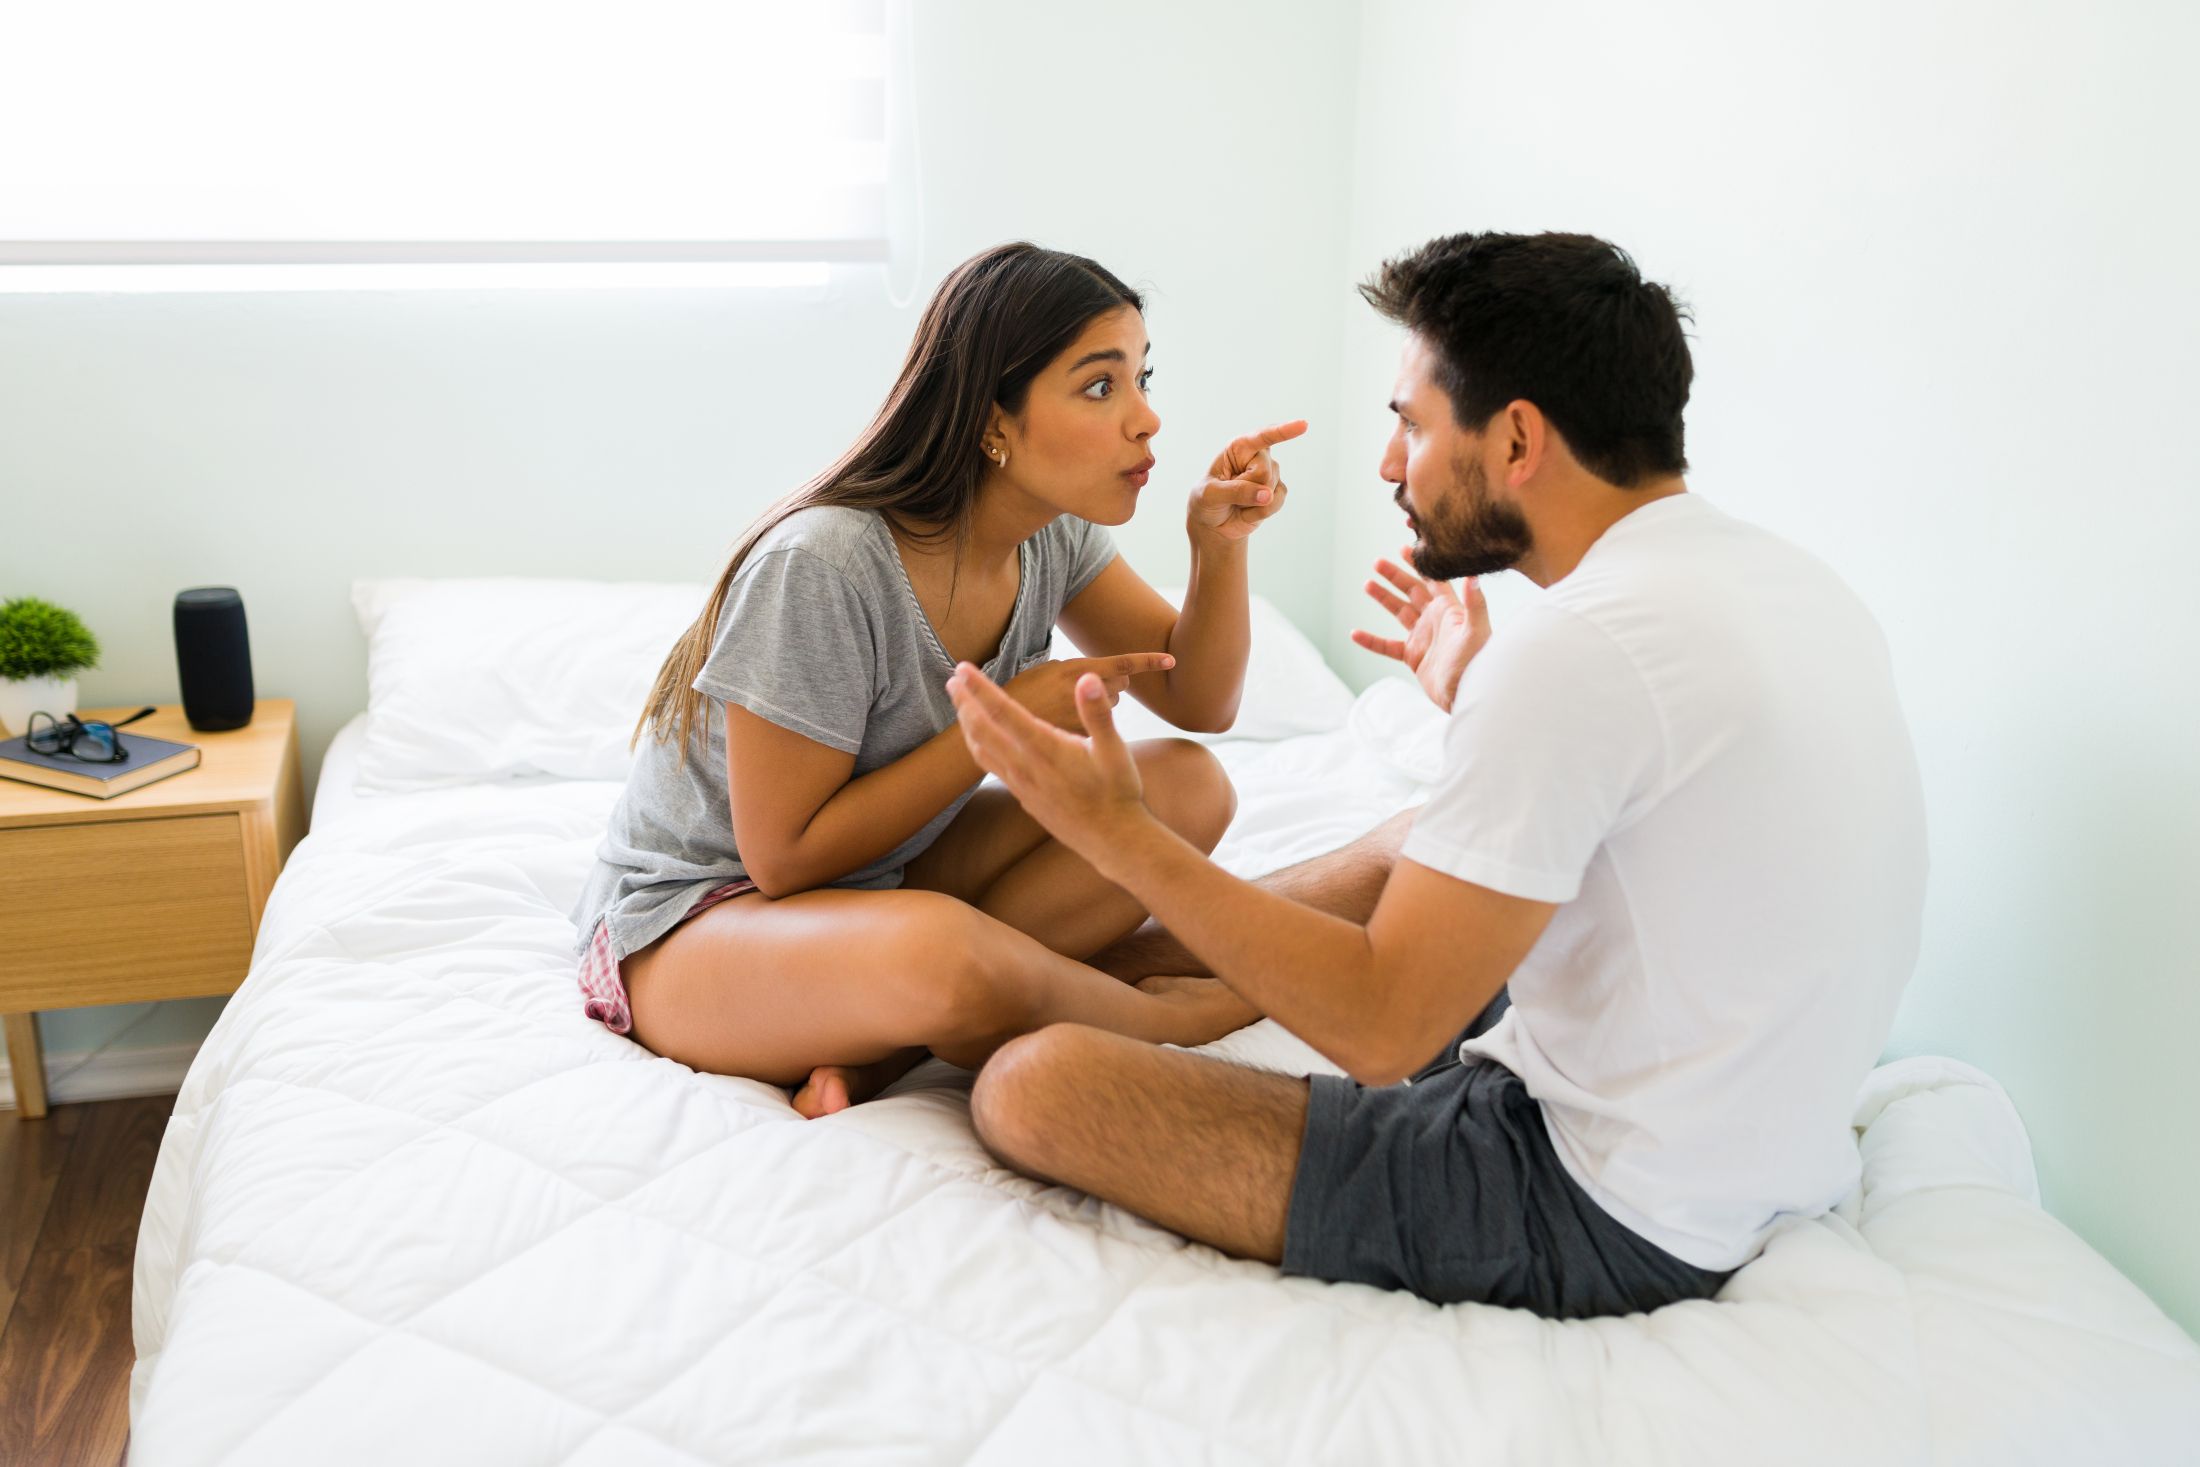 you-are-the-one-to-blame-resentful-young-woman-demanding-something-from-her-boyfriend-while-arguing-in-the-bedroom.jpg